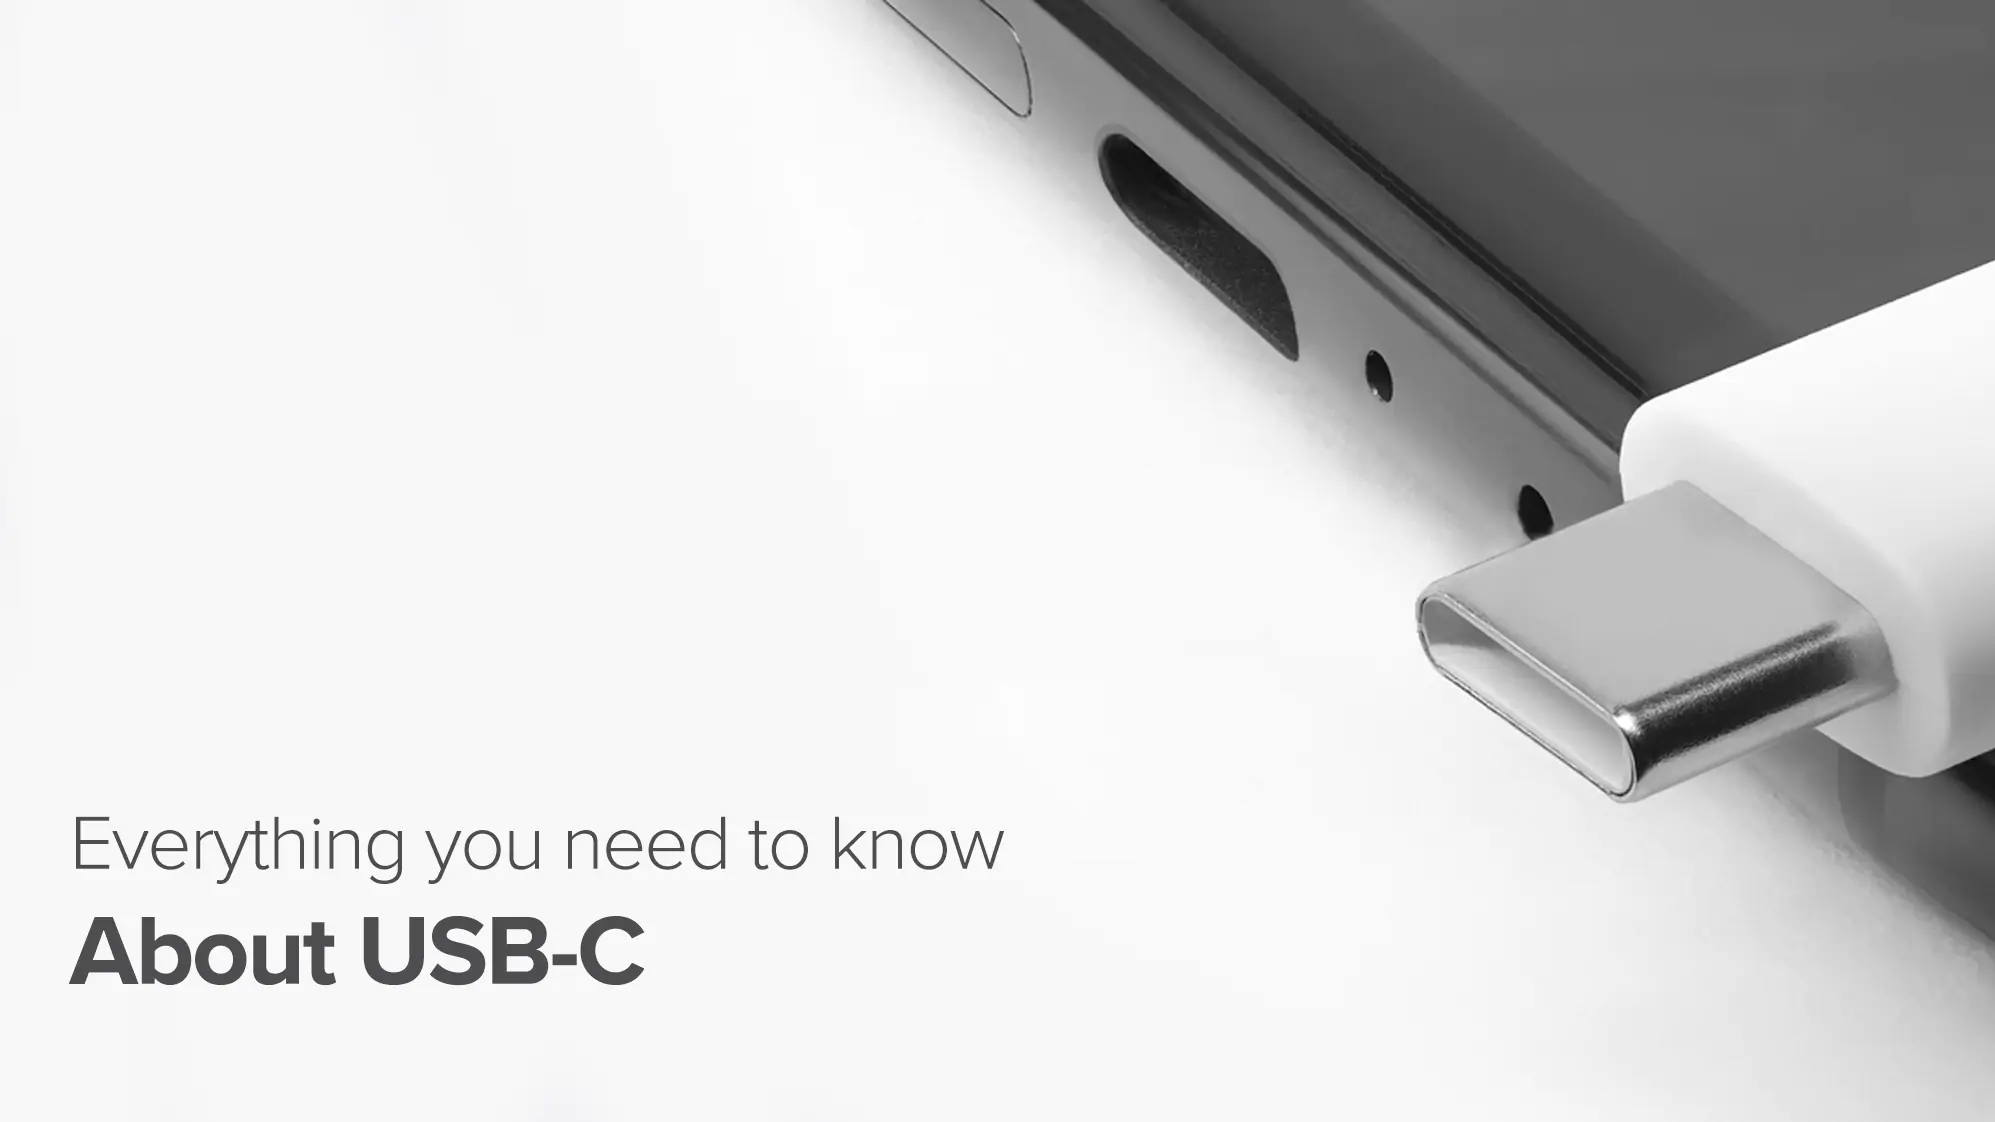 What you need to know about USB-C